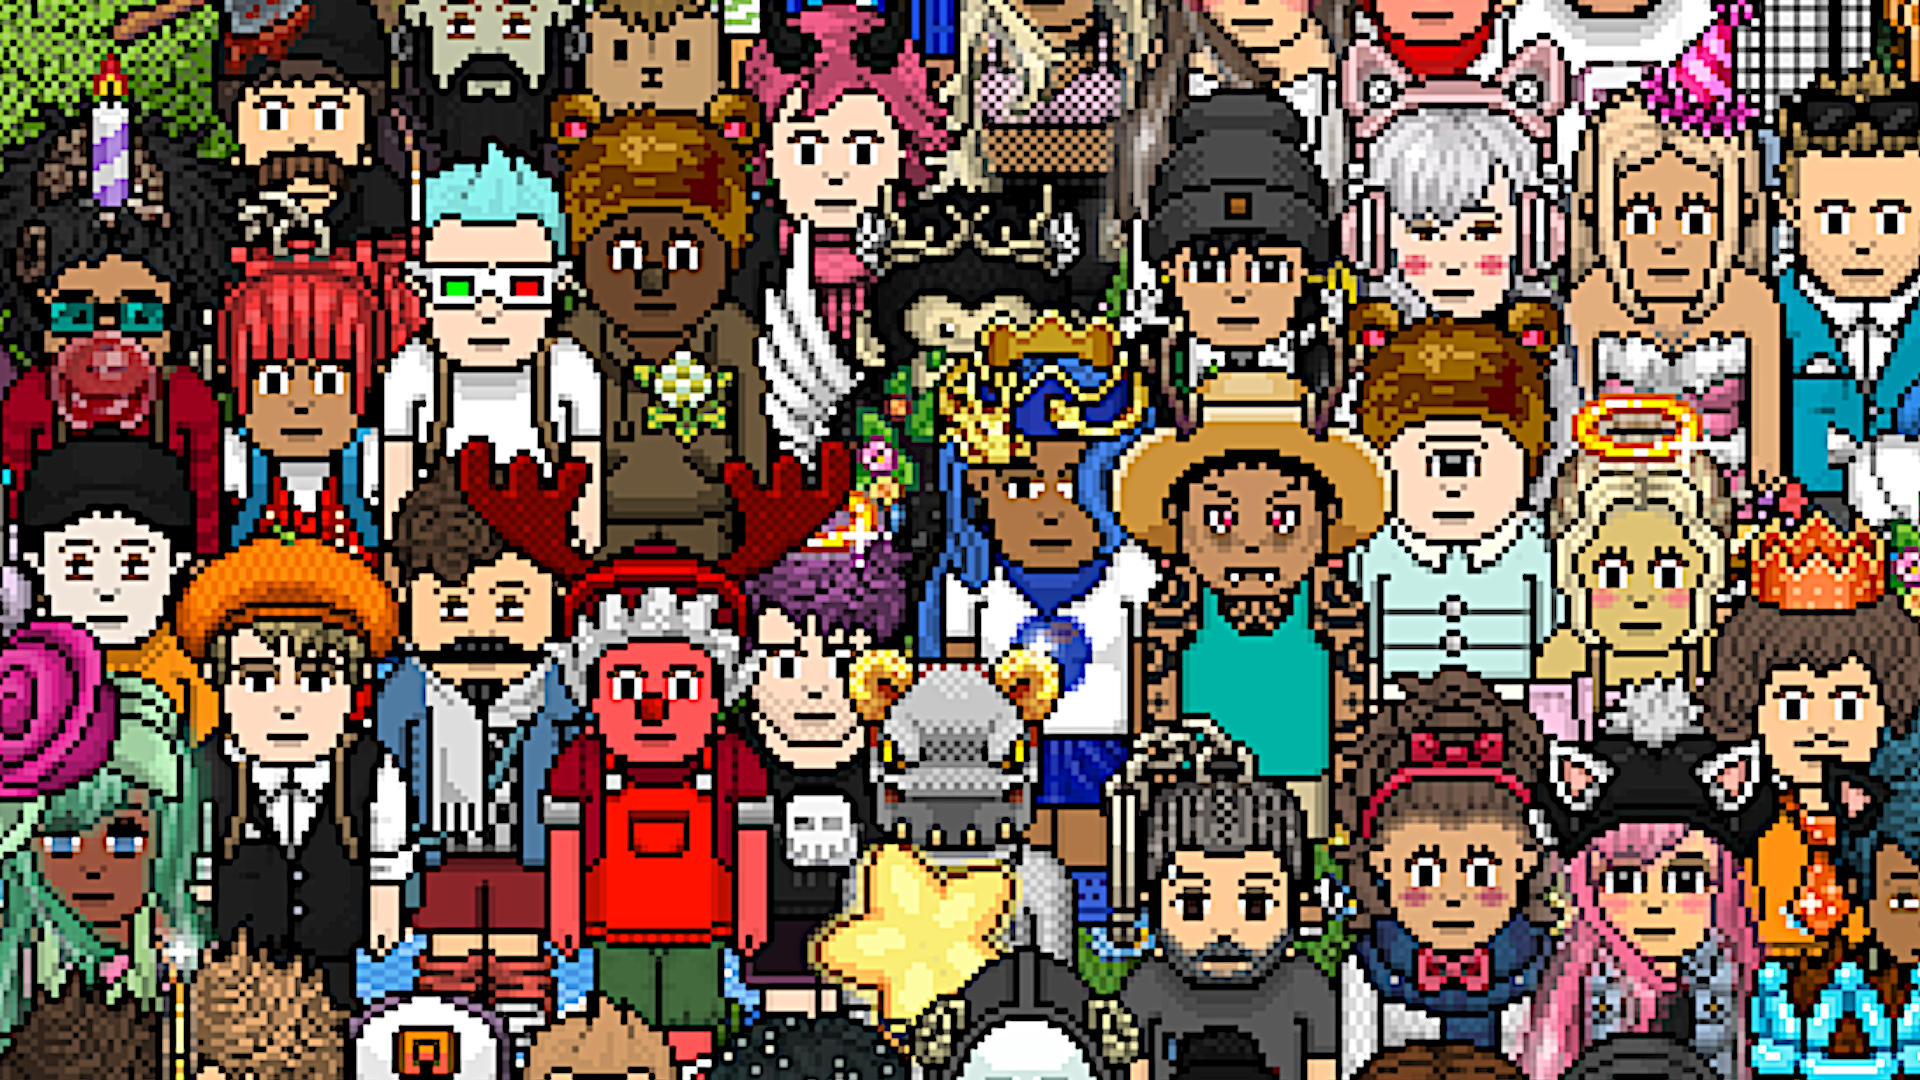  Habbo Hotel: Origins is a delightfully strange and chaotic time capsule from the internet of the early 2000s—and a fresh start for a game marred by controversy 